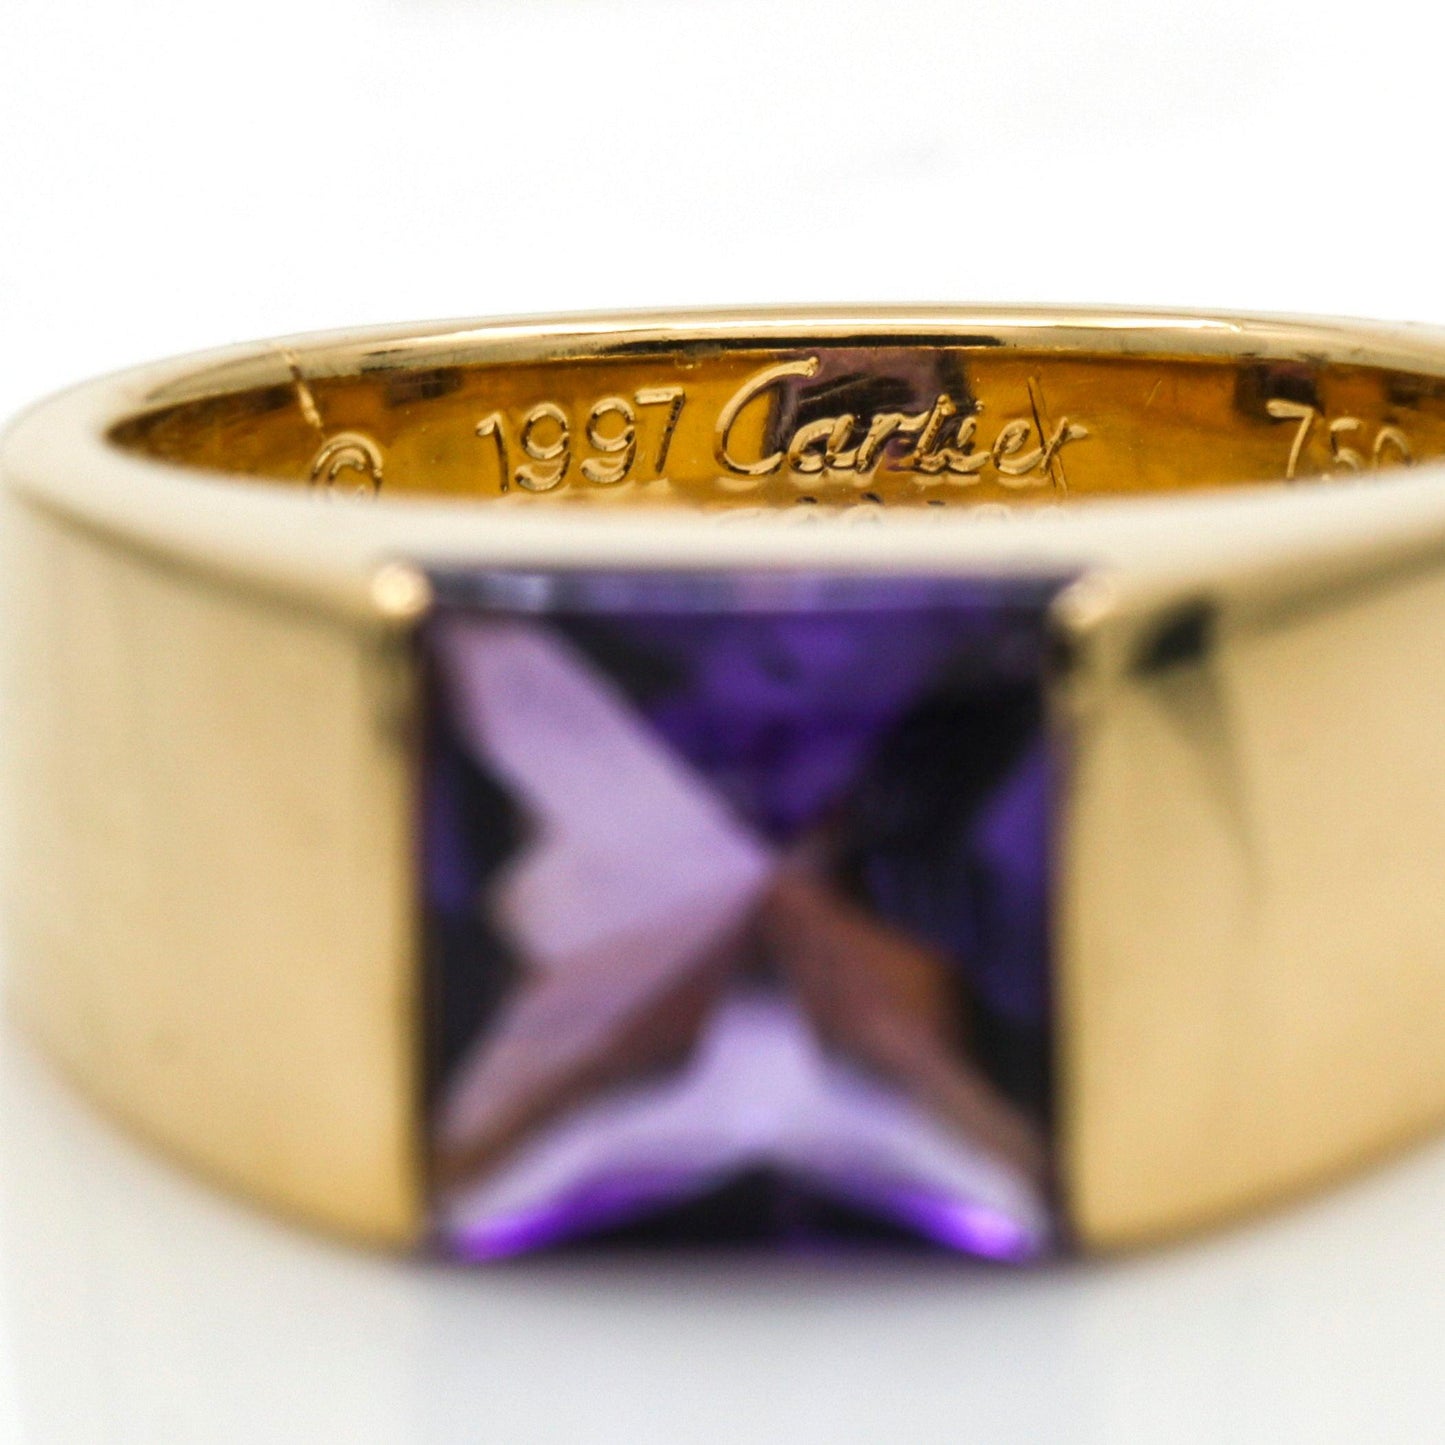 Women's Cartier Tank Large Amethyst Ring in 18k Yellow Gold - 31 Jewels Inc.